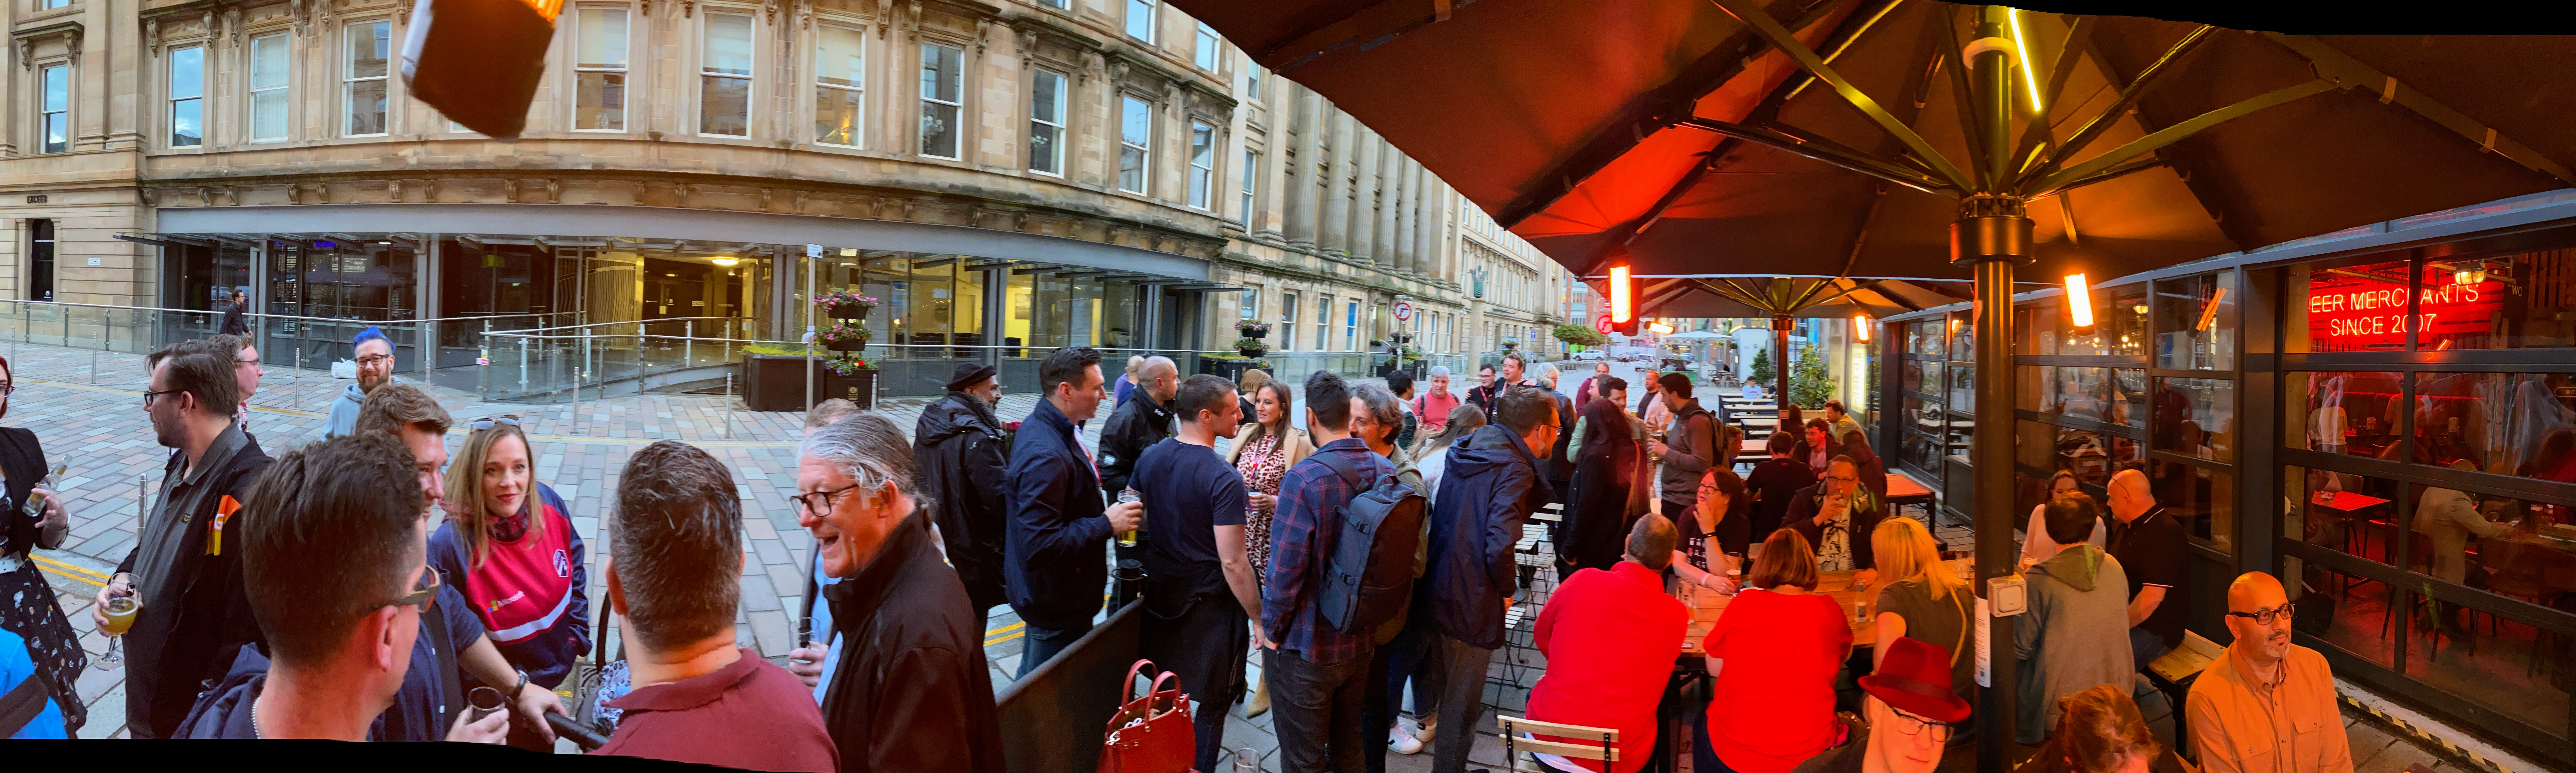 One of the many visits to Brewdog - large group of people outside the Brewdog bar in Glasgow